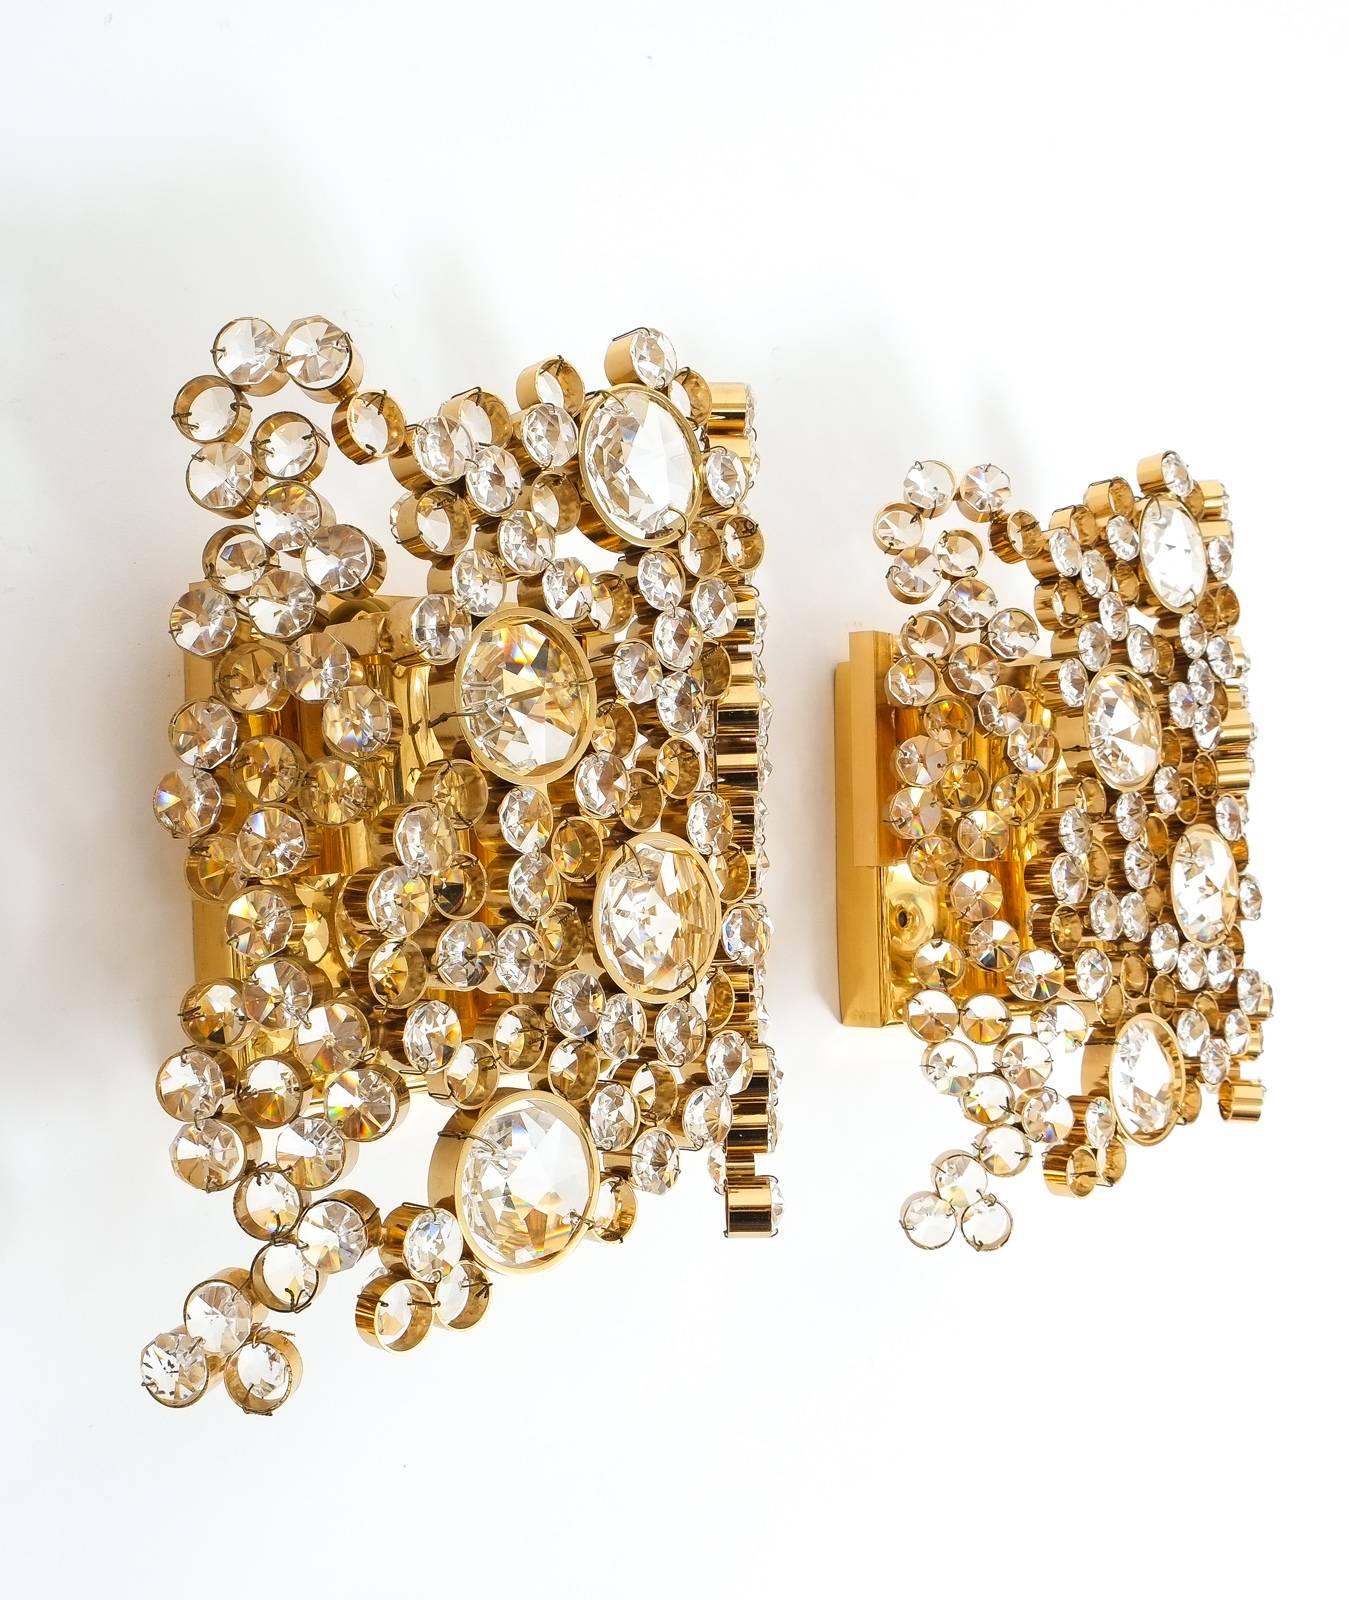 Hollywood Regency Pair of Gilt Brass and Crystal Glass Encrusted Sconces by Palwa